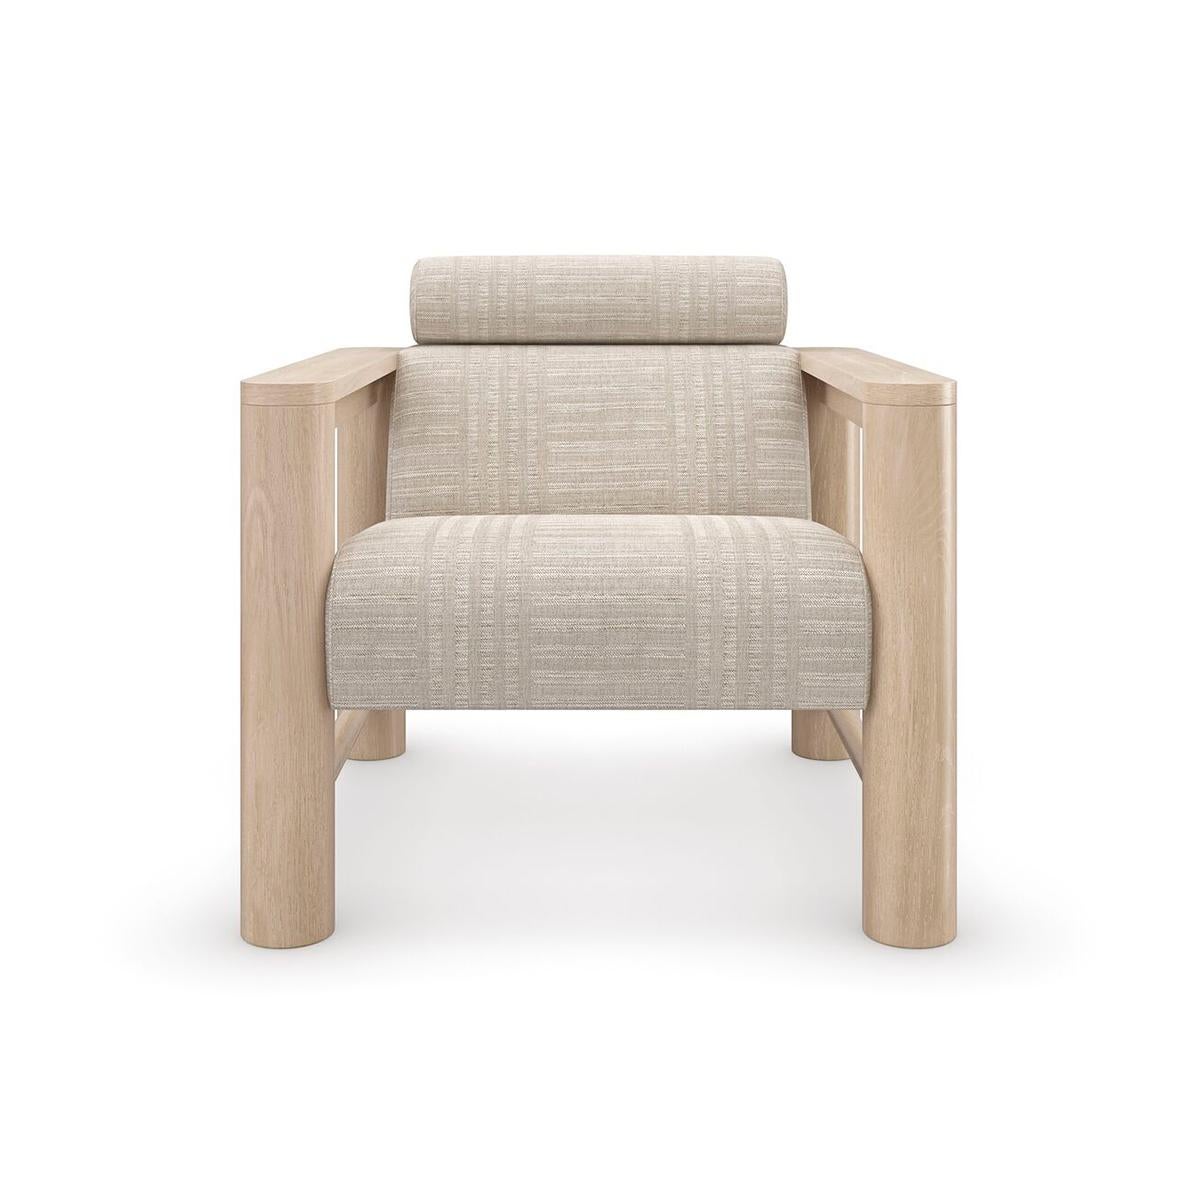 With a luxe, lounge-like aesthetic, this statement-maker exemplifies a unity of materiality, form and function. An upholstered no-sag foam seat and backrest.

With a pillared Natural Oak frame, softly contrasted by a tactile fabric that introduces a